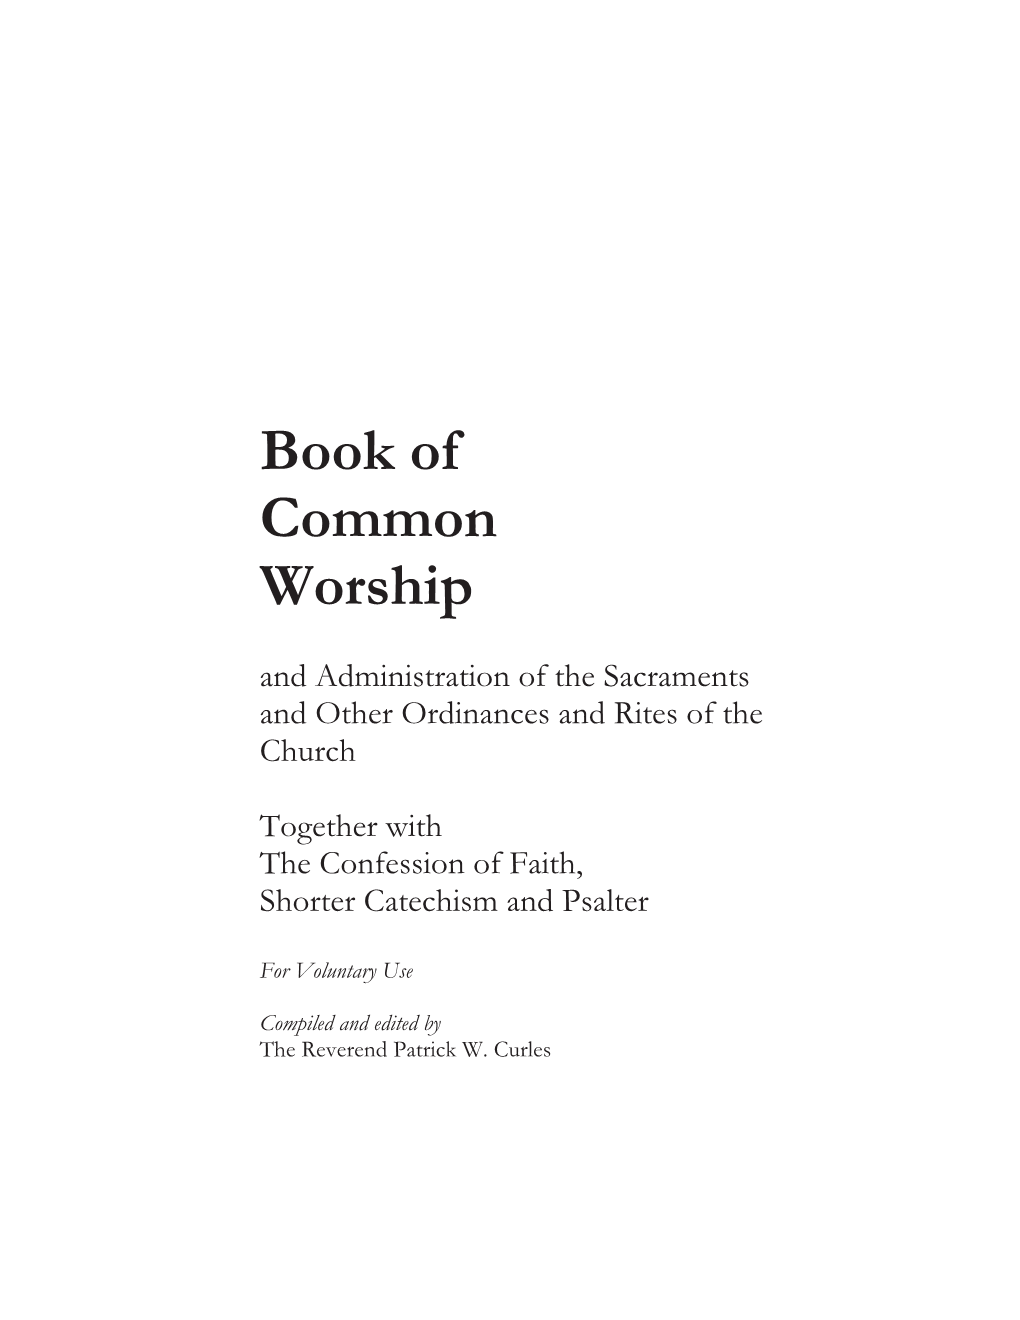 Book of Common Worship and Administration of the Sacraments and Other Ordinances and Rites of the Church